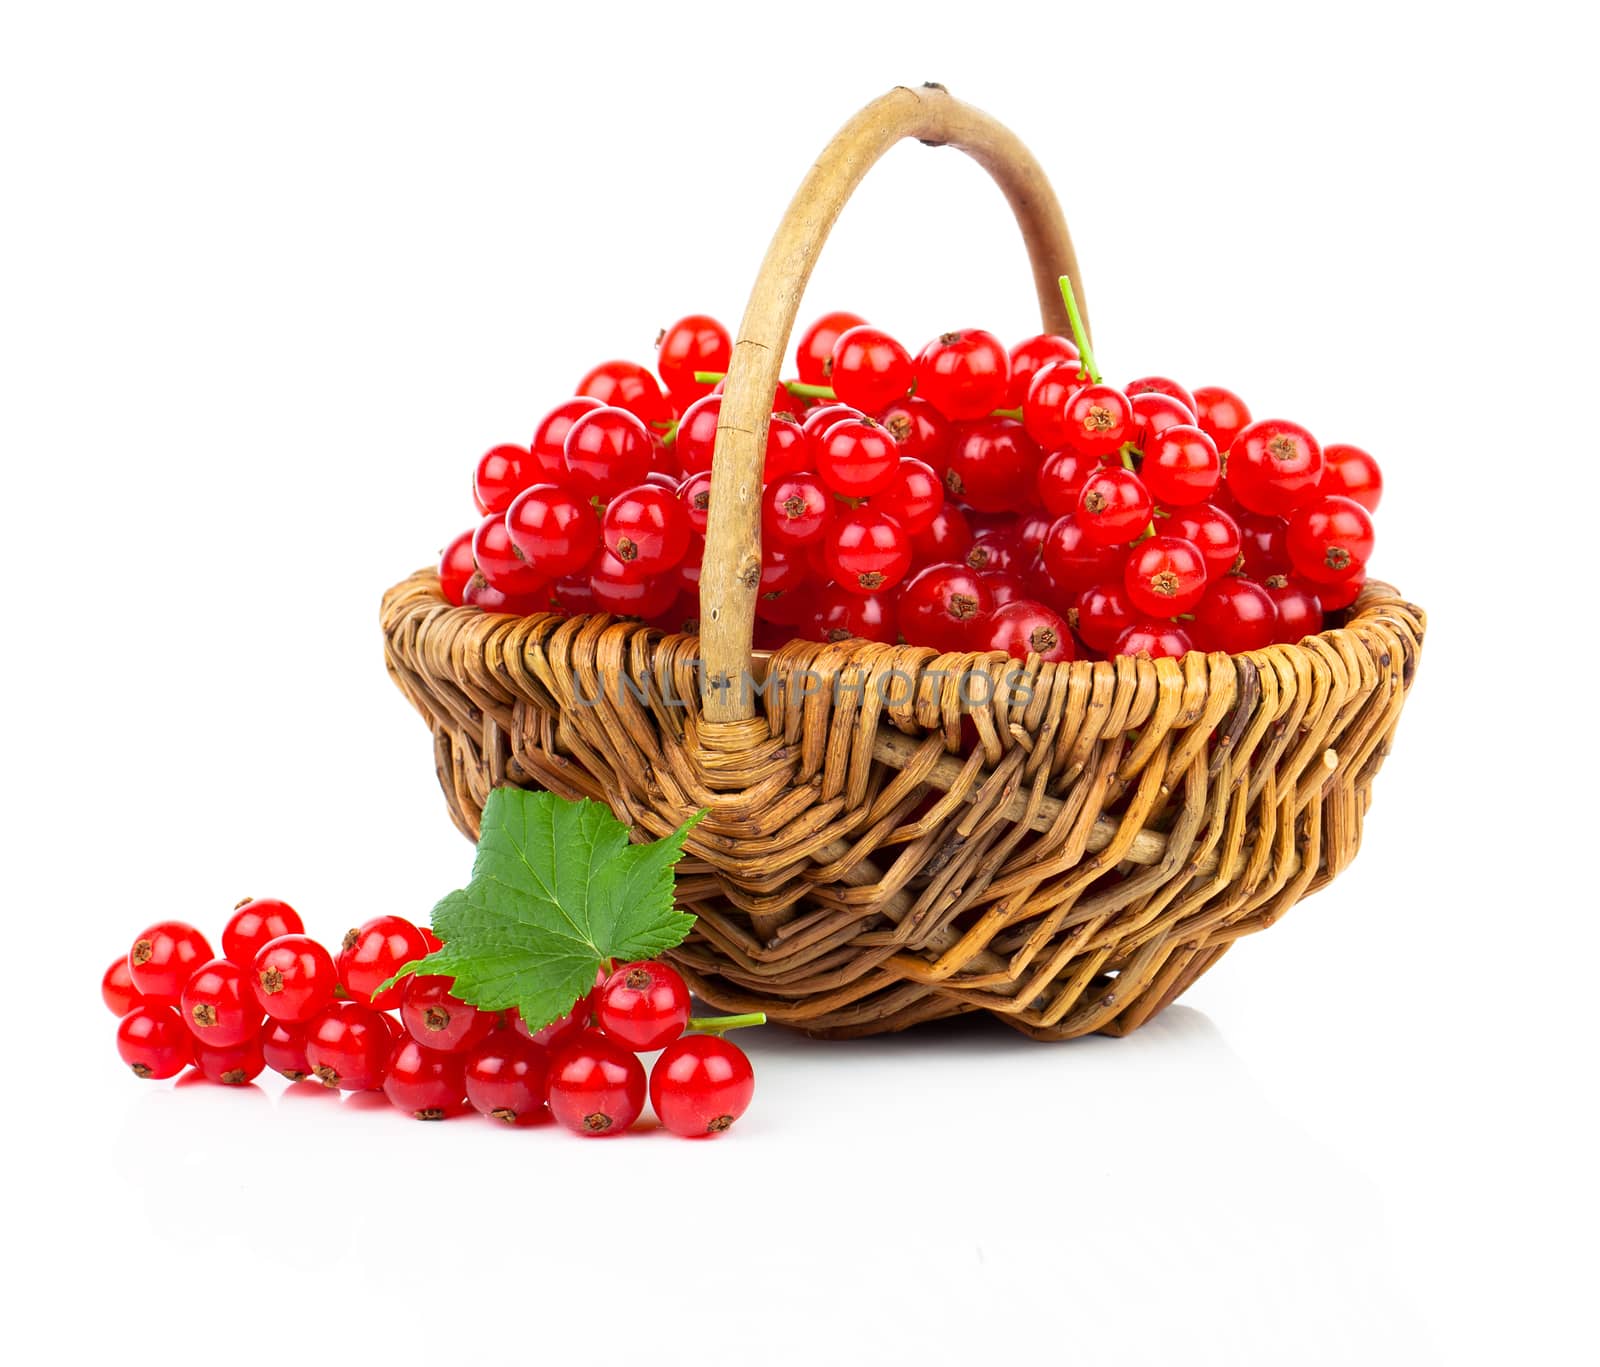 Basket full of red currant on a white background by motorolka